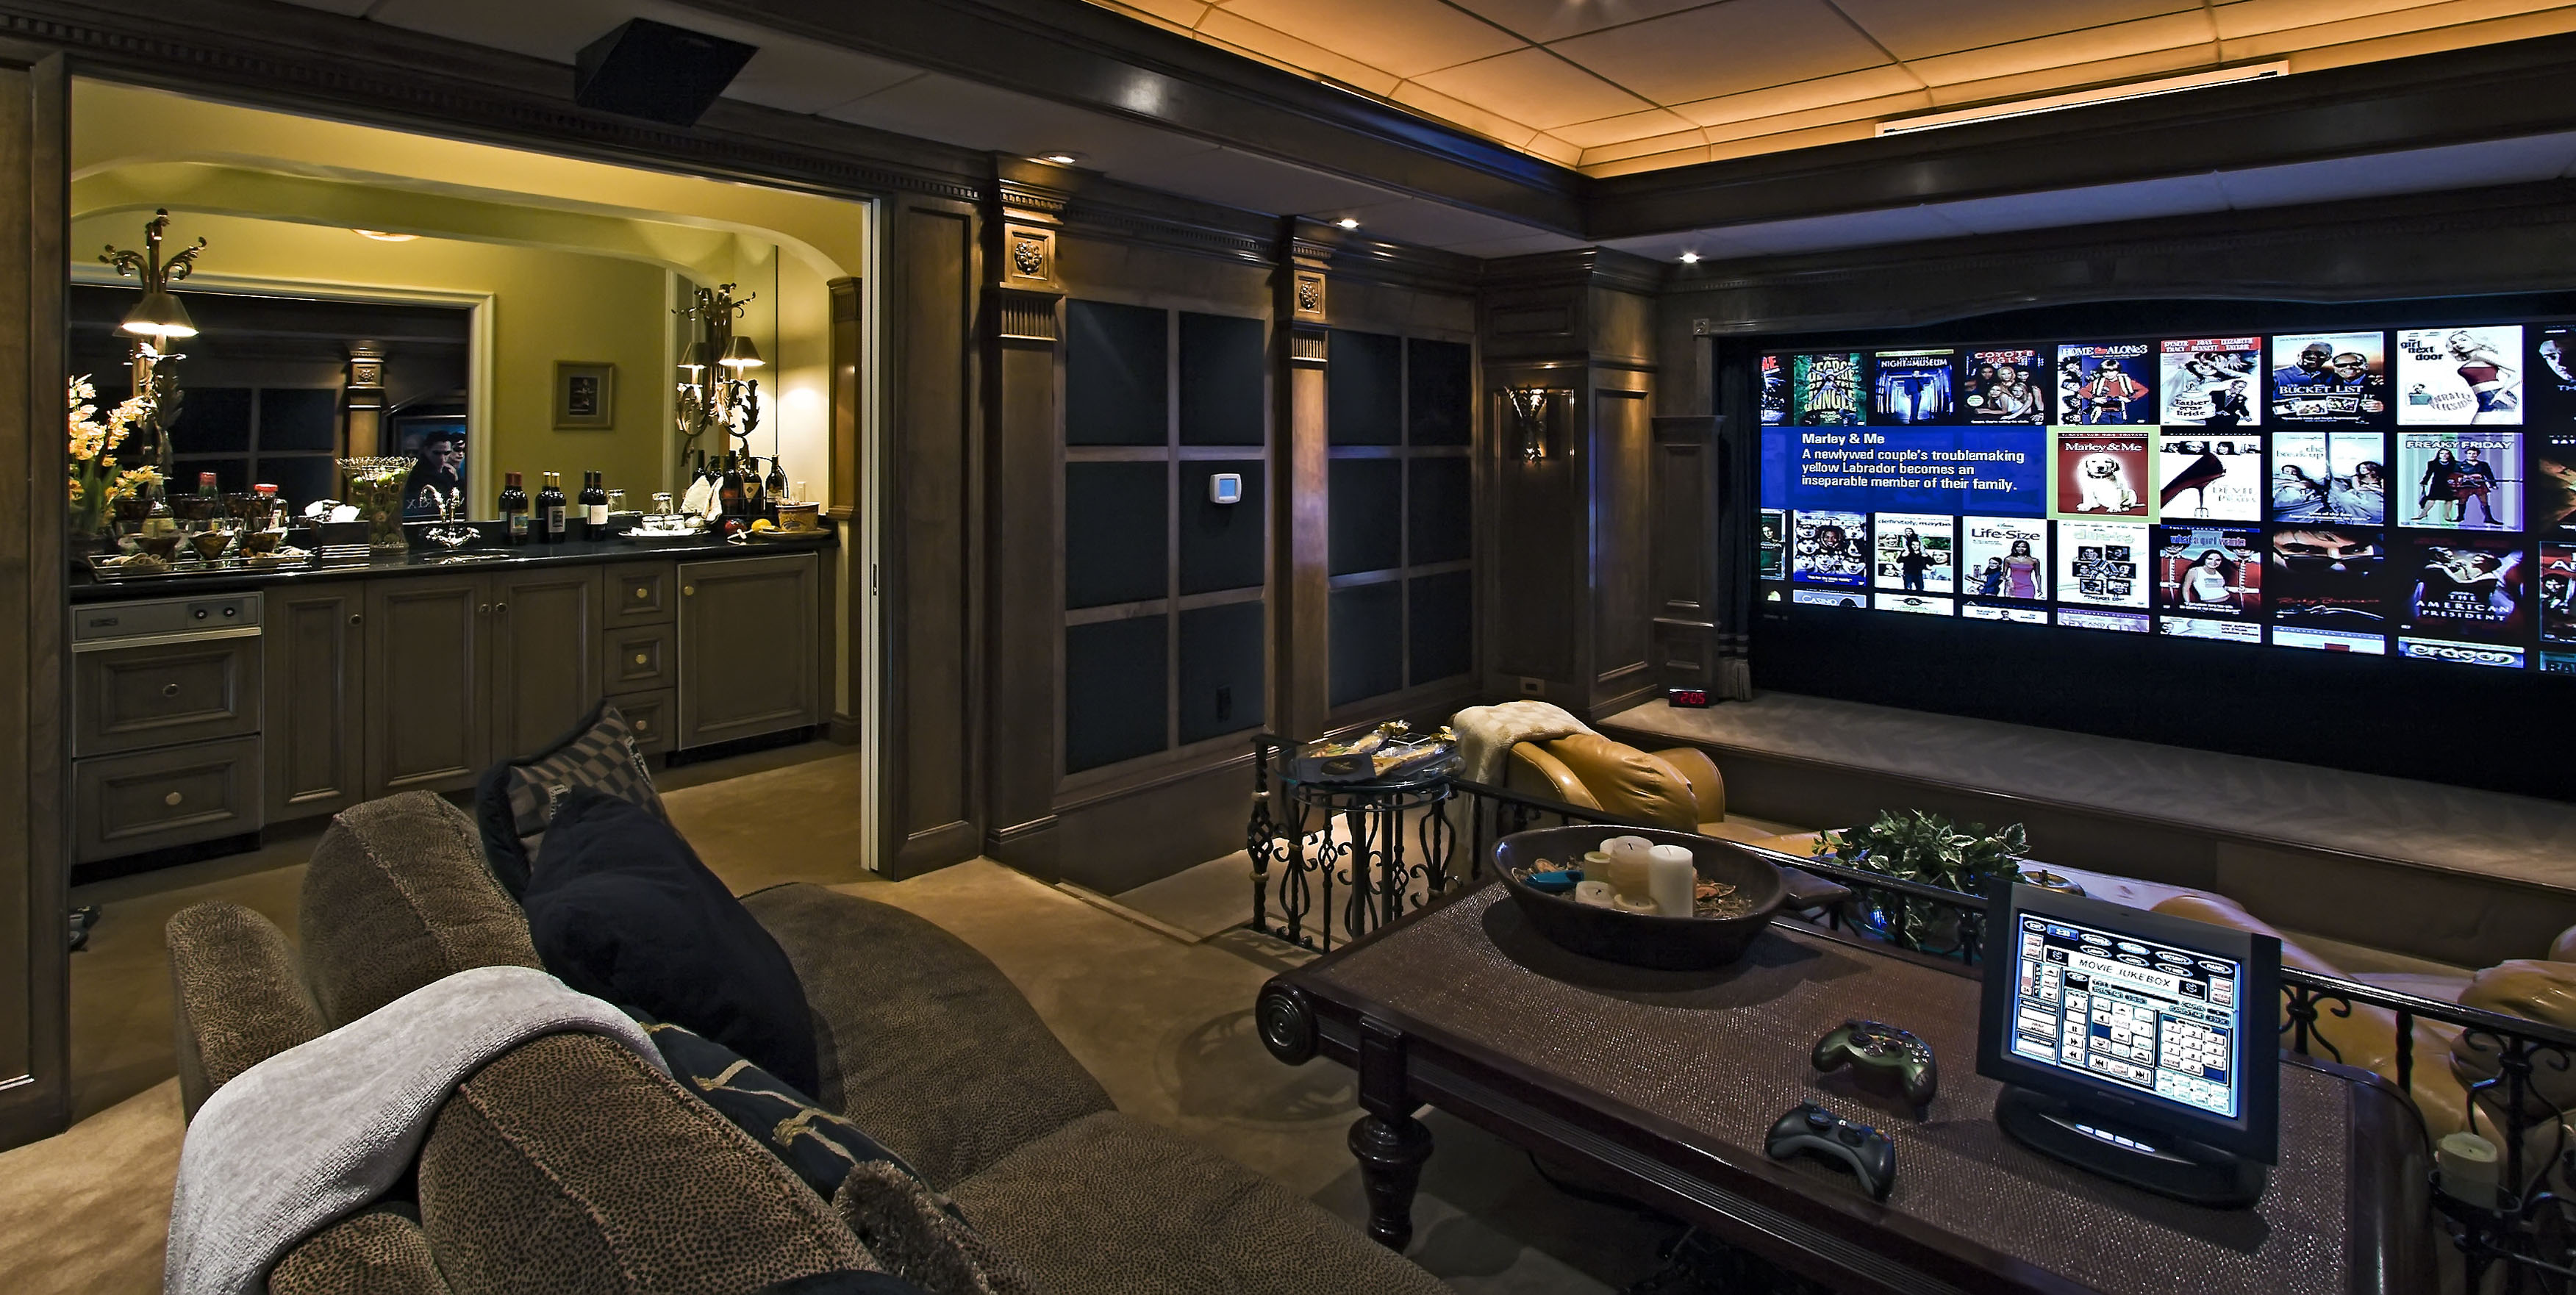 Media Room Ideas: Transform Your Home Into A Movie Theater